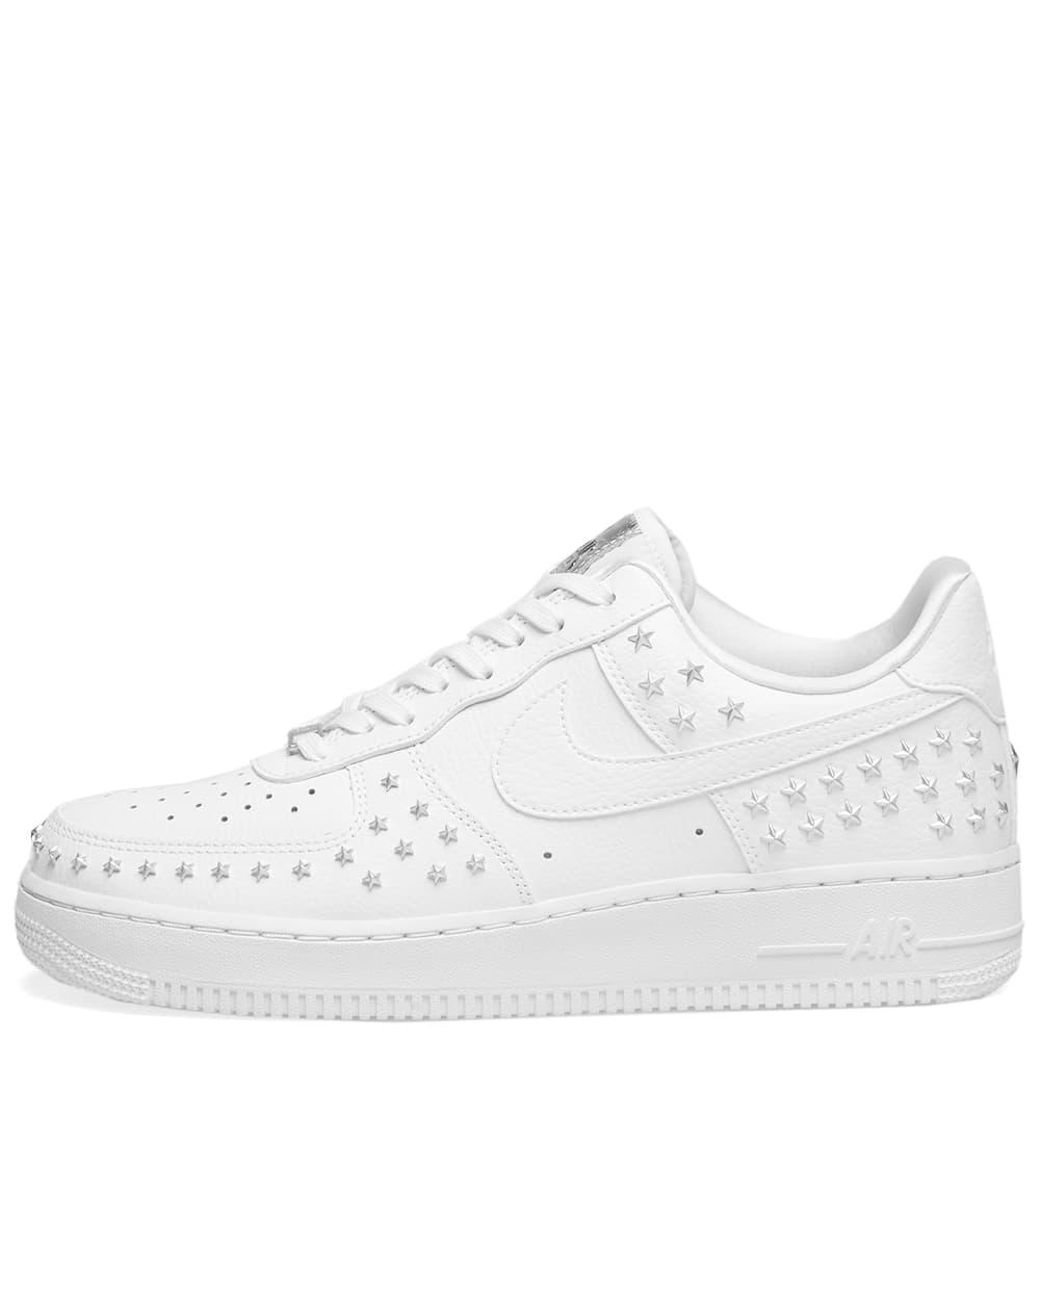 Nike Air Force 1' 07 Xx Studded Shoe in White | Lyst